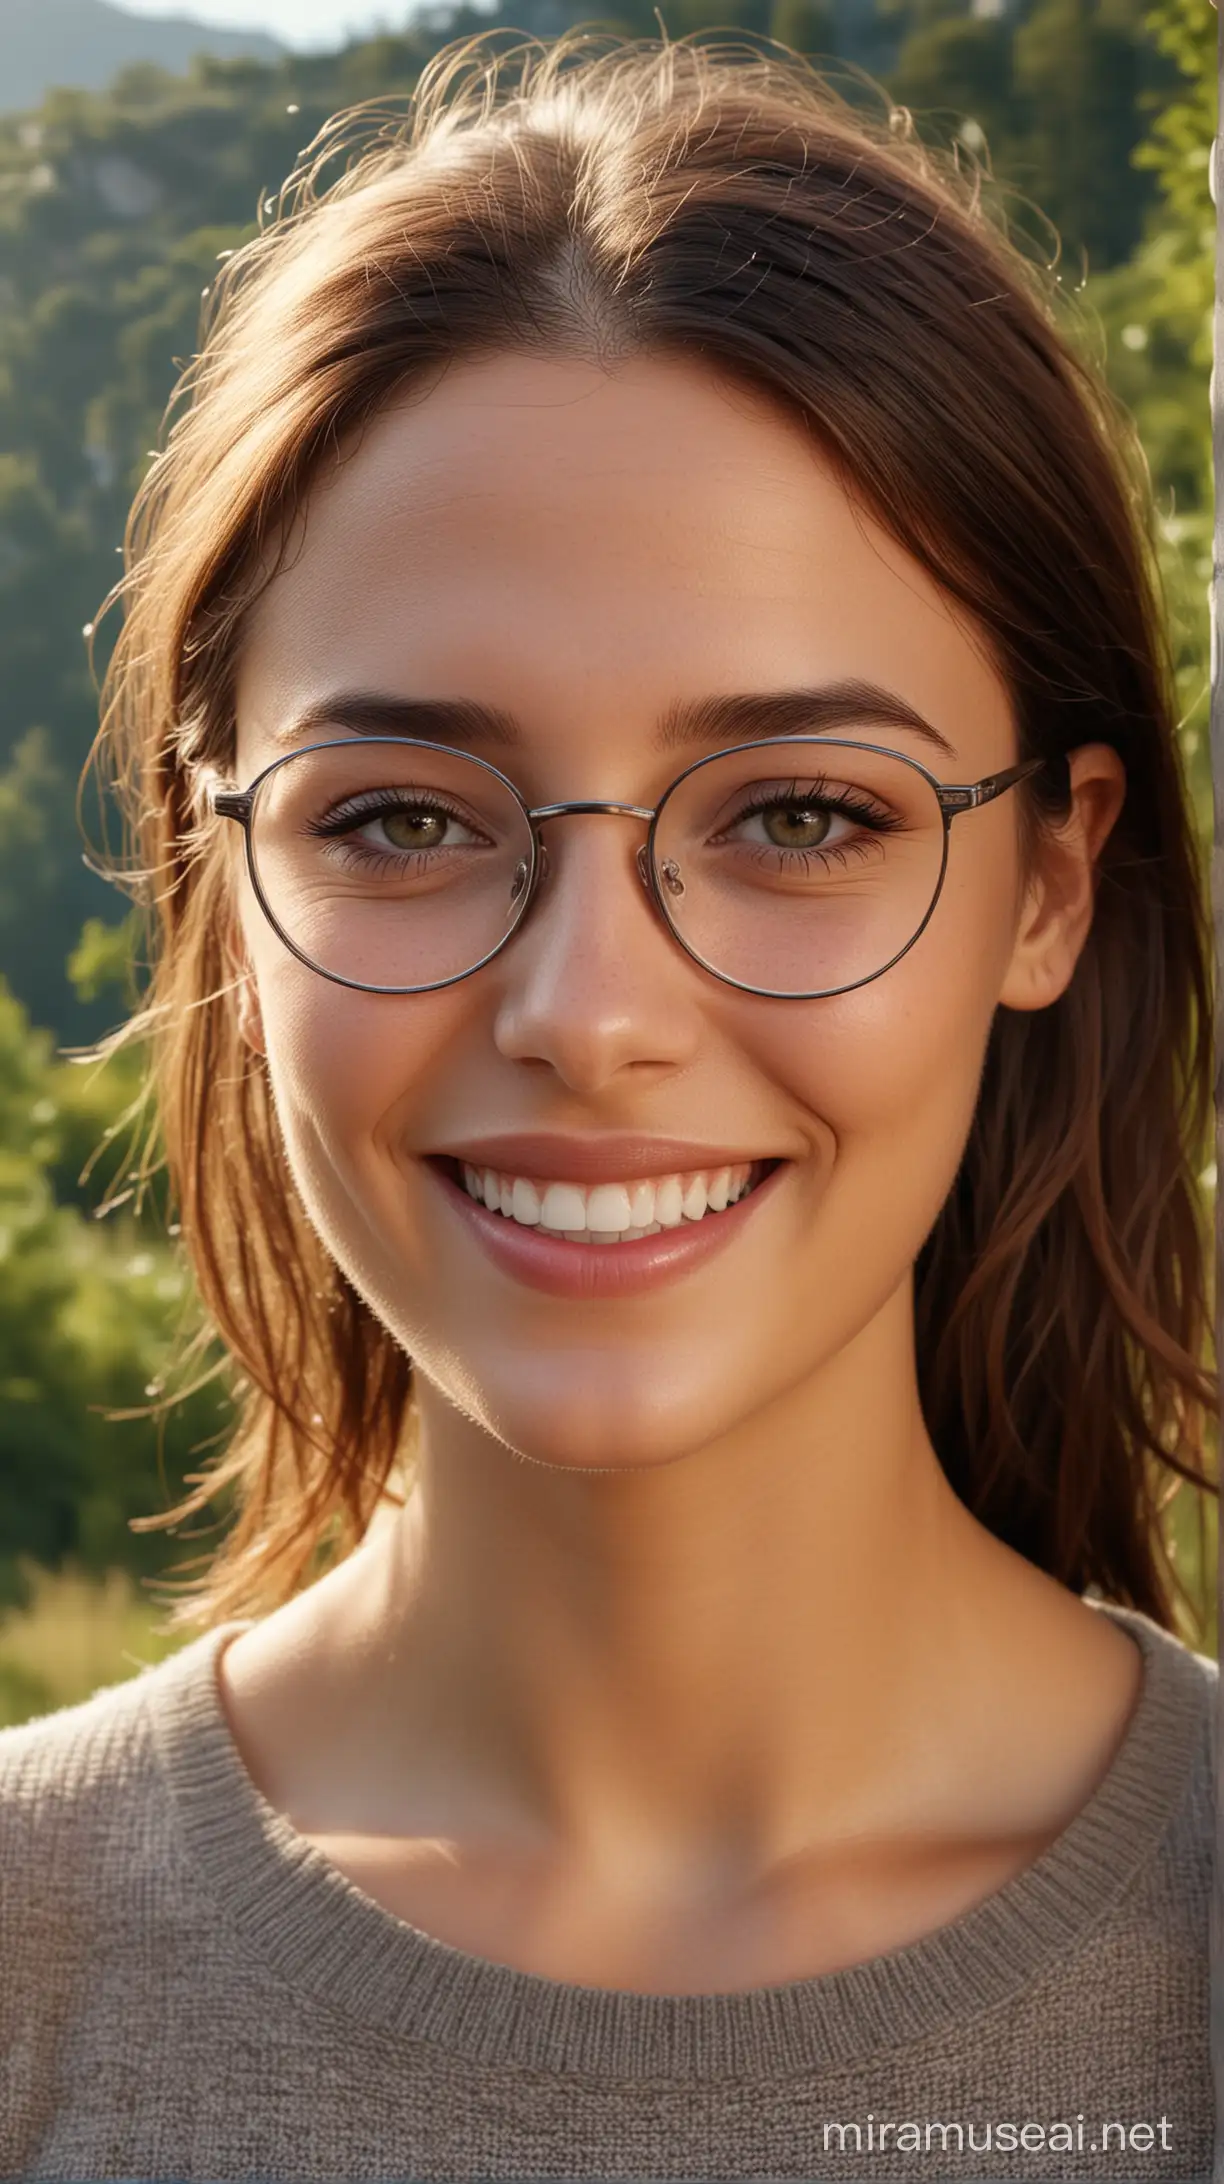 Young Woman with Glasses Smiling in Natural Setting Photorealistic Portrait